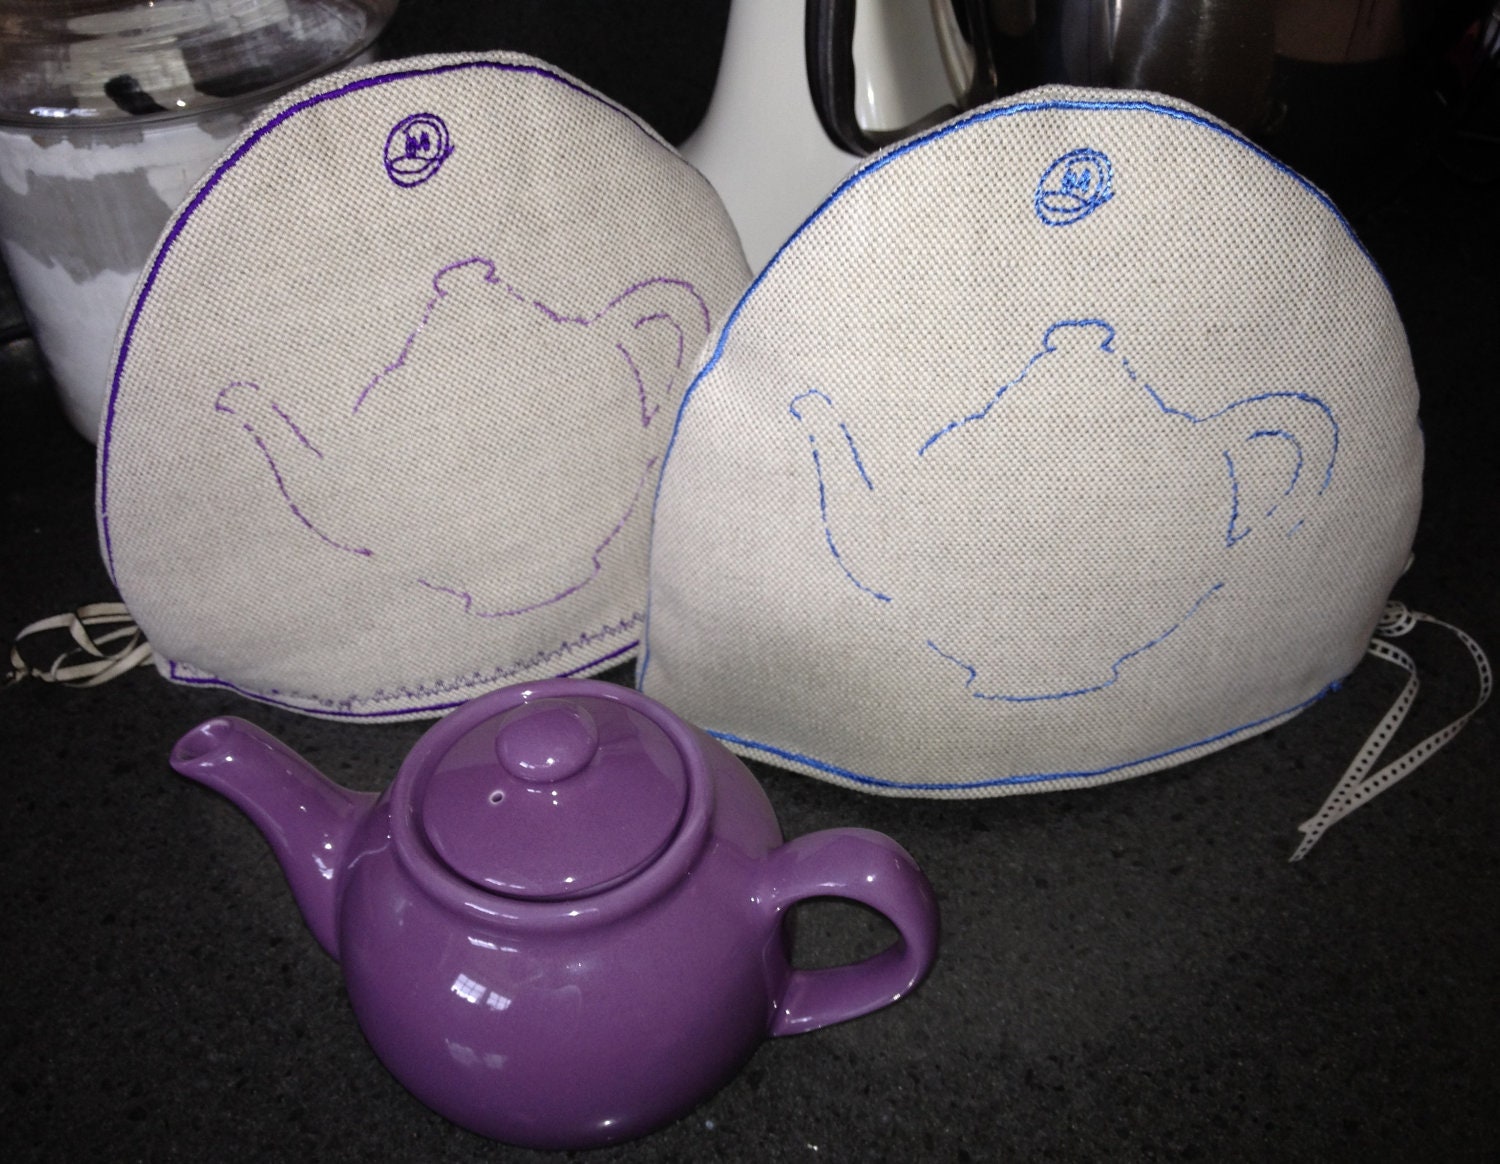 Tea For one, Cosy - Homemade embroidery teapot